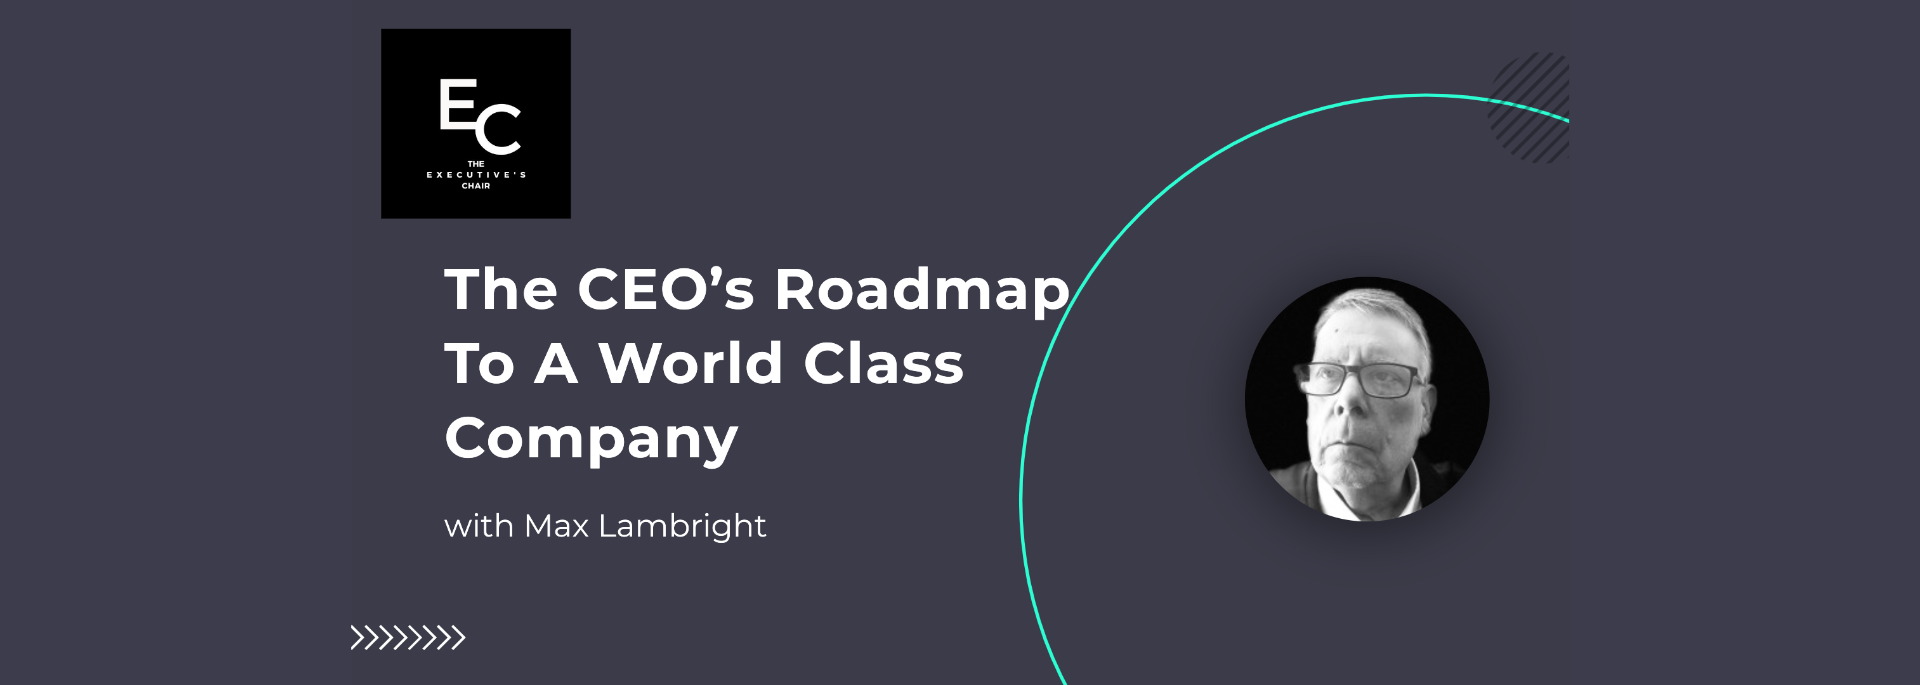 The CEO’s Roadmap To A World Class Company